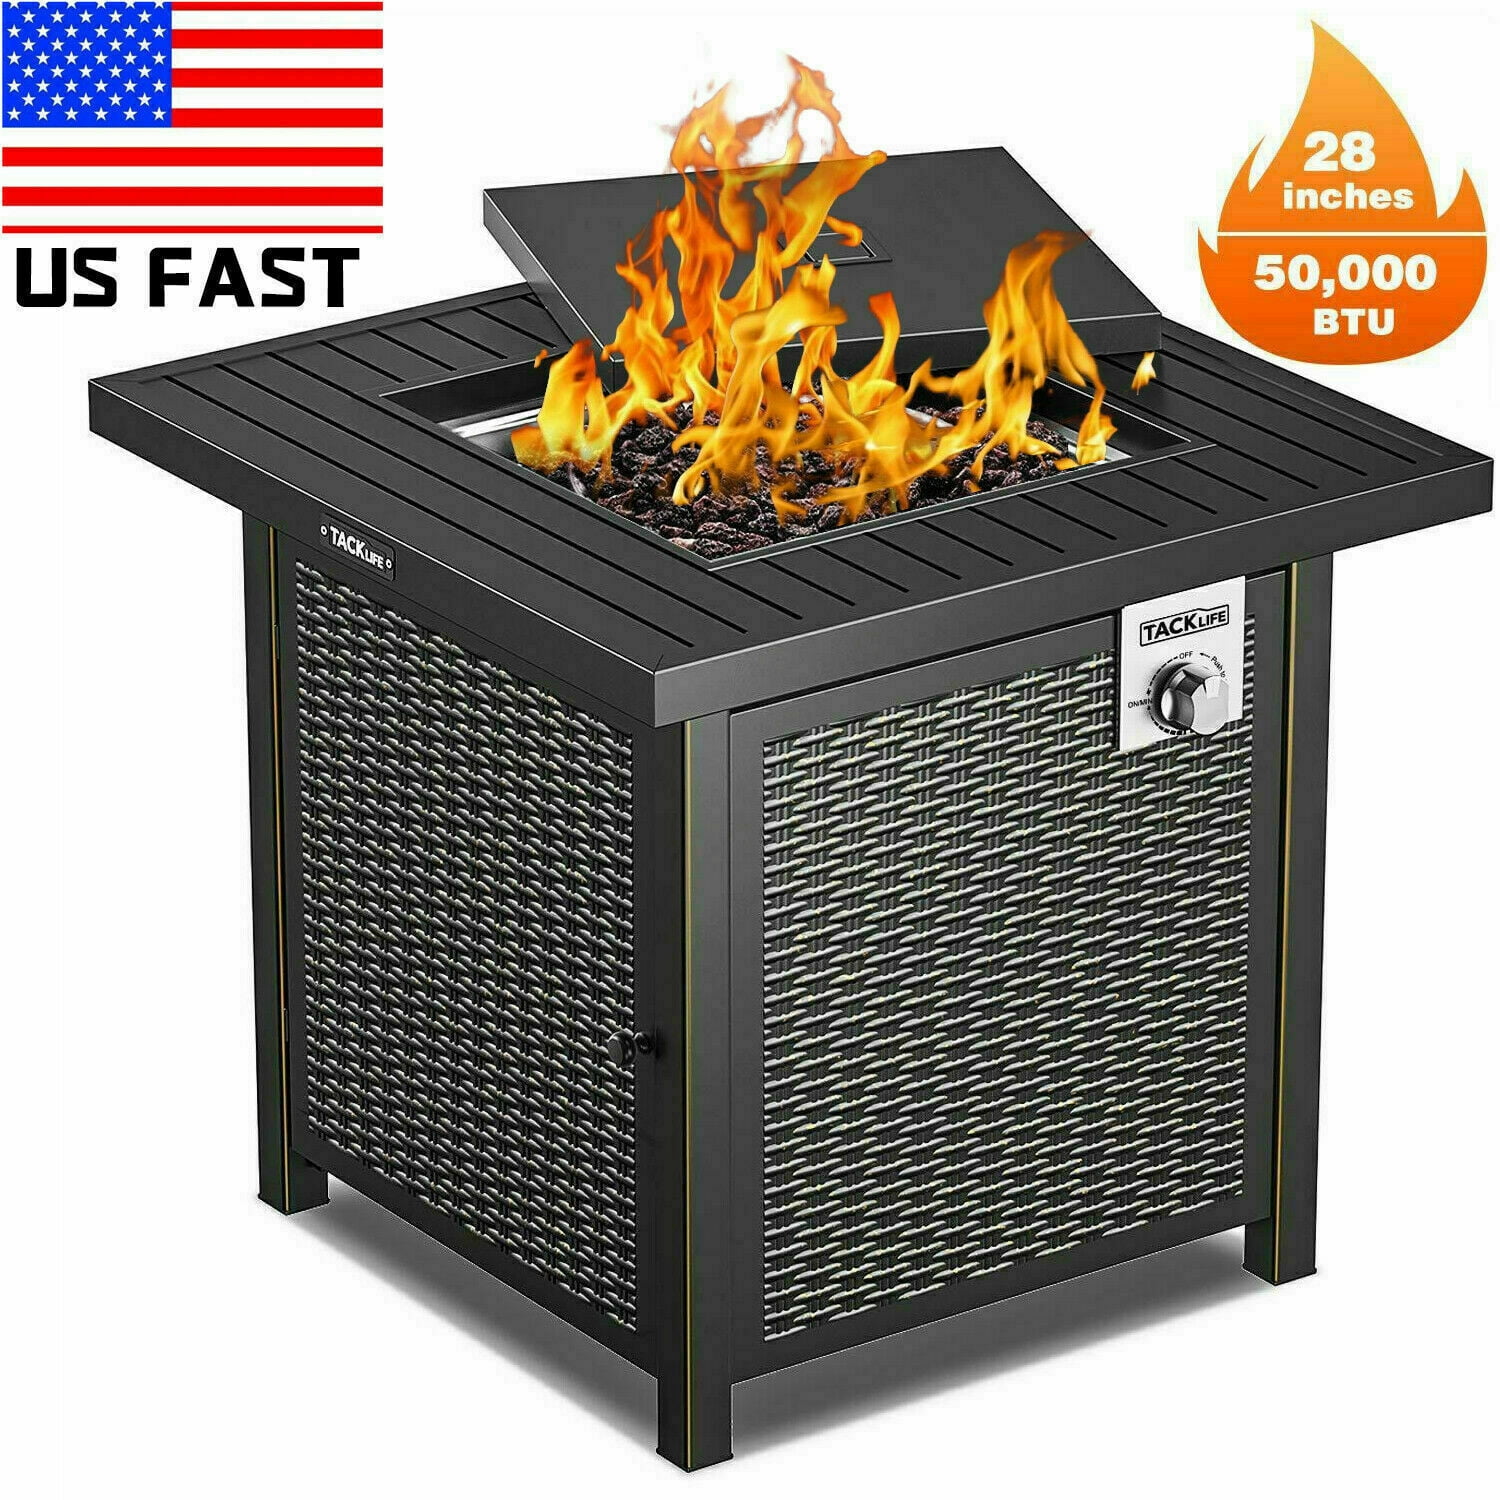 Outdoor Companion TACKLIEE Propane Fire Pit Table CSA Certification and Strong Striped Steel Surface Indoor Companion 28 Inch 50,000 BTU Auto-Ignition Gas Fire Pit Table with Cover 